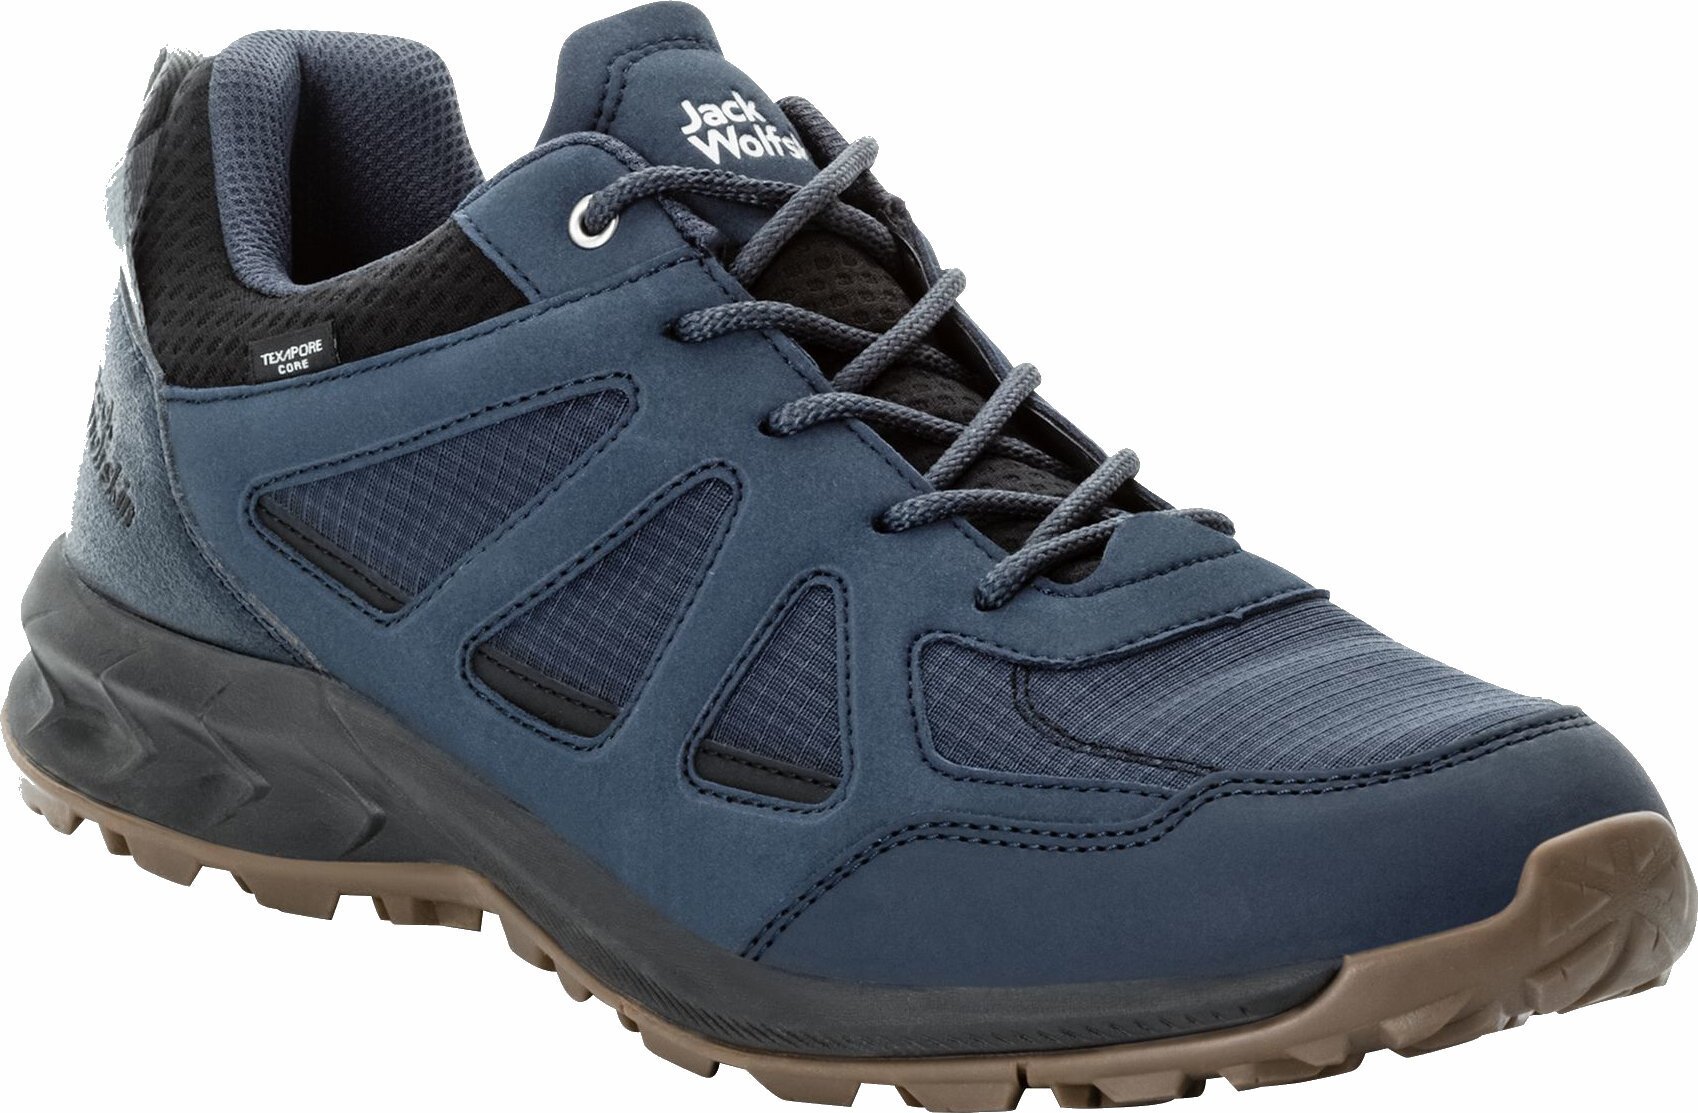 Chaussures outdoor hommes Jack Wolfskin Woodland 2 Texapore Low M Night Blue 45 Chaussures outdoor hommes